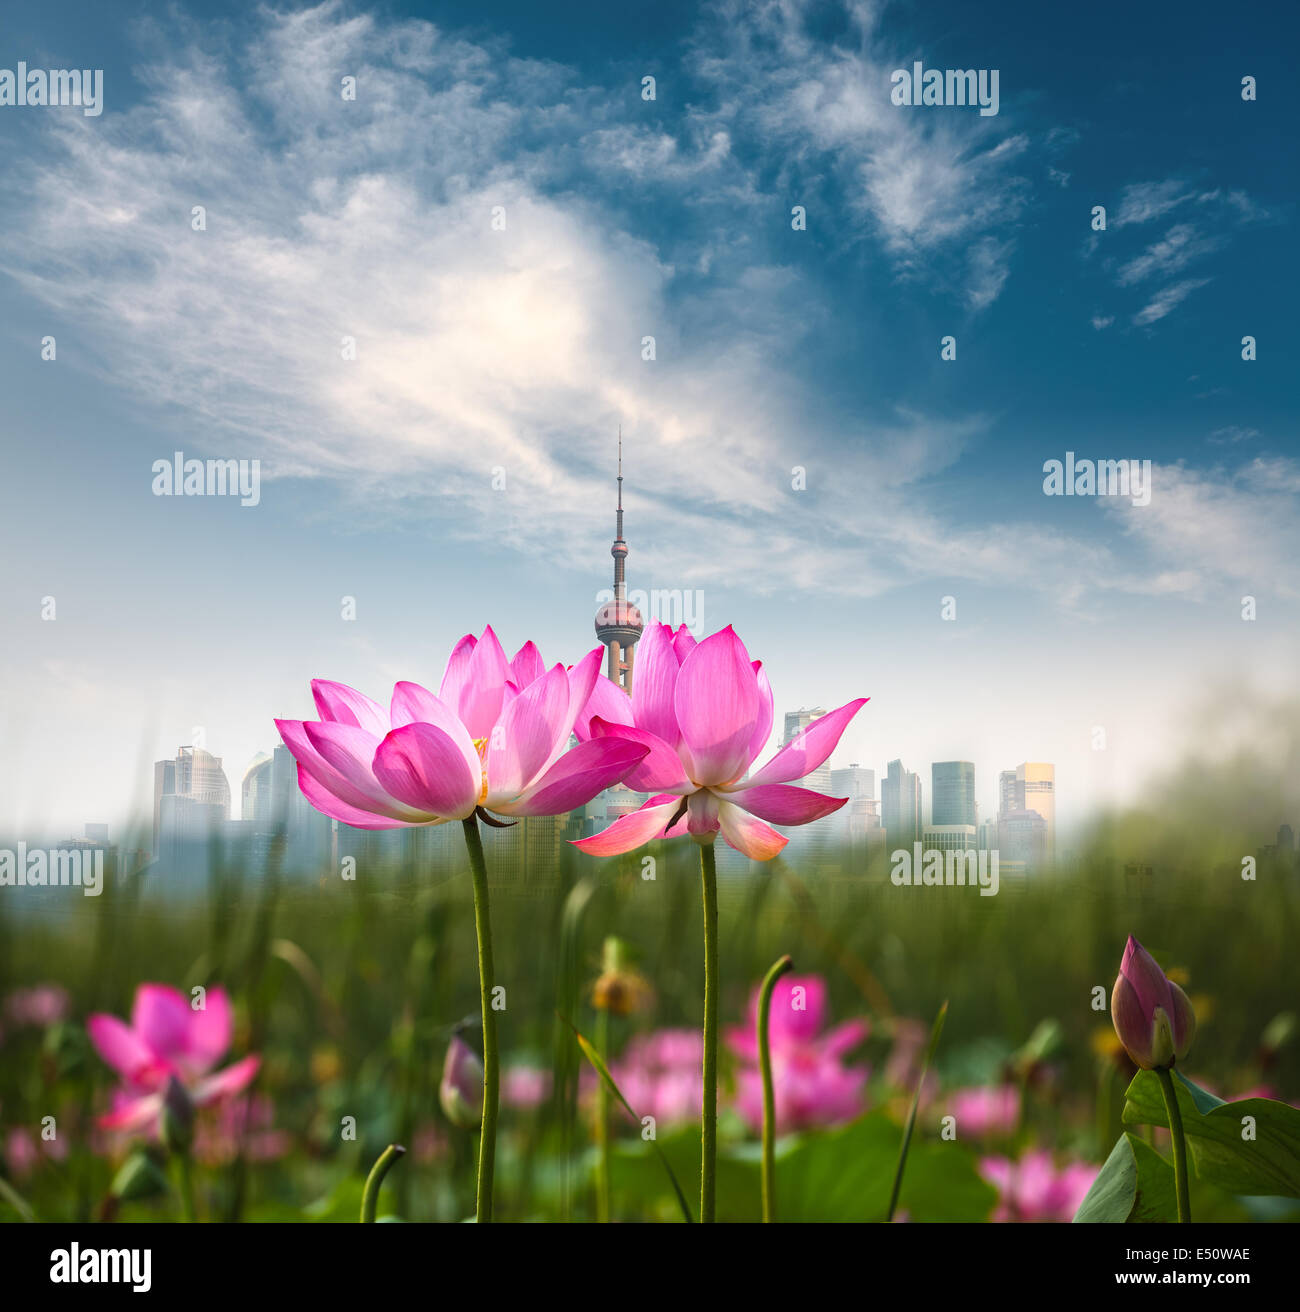 lotus blossoms in shanghai Stock Photo